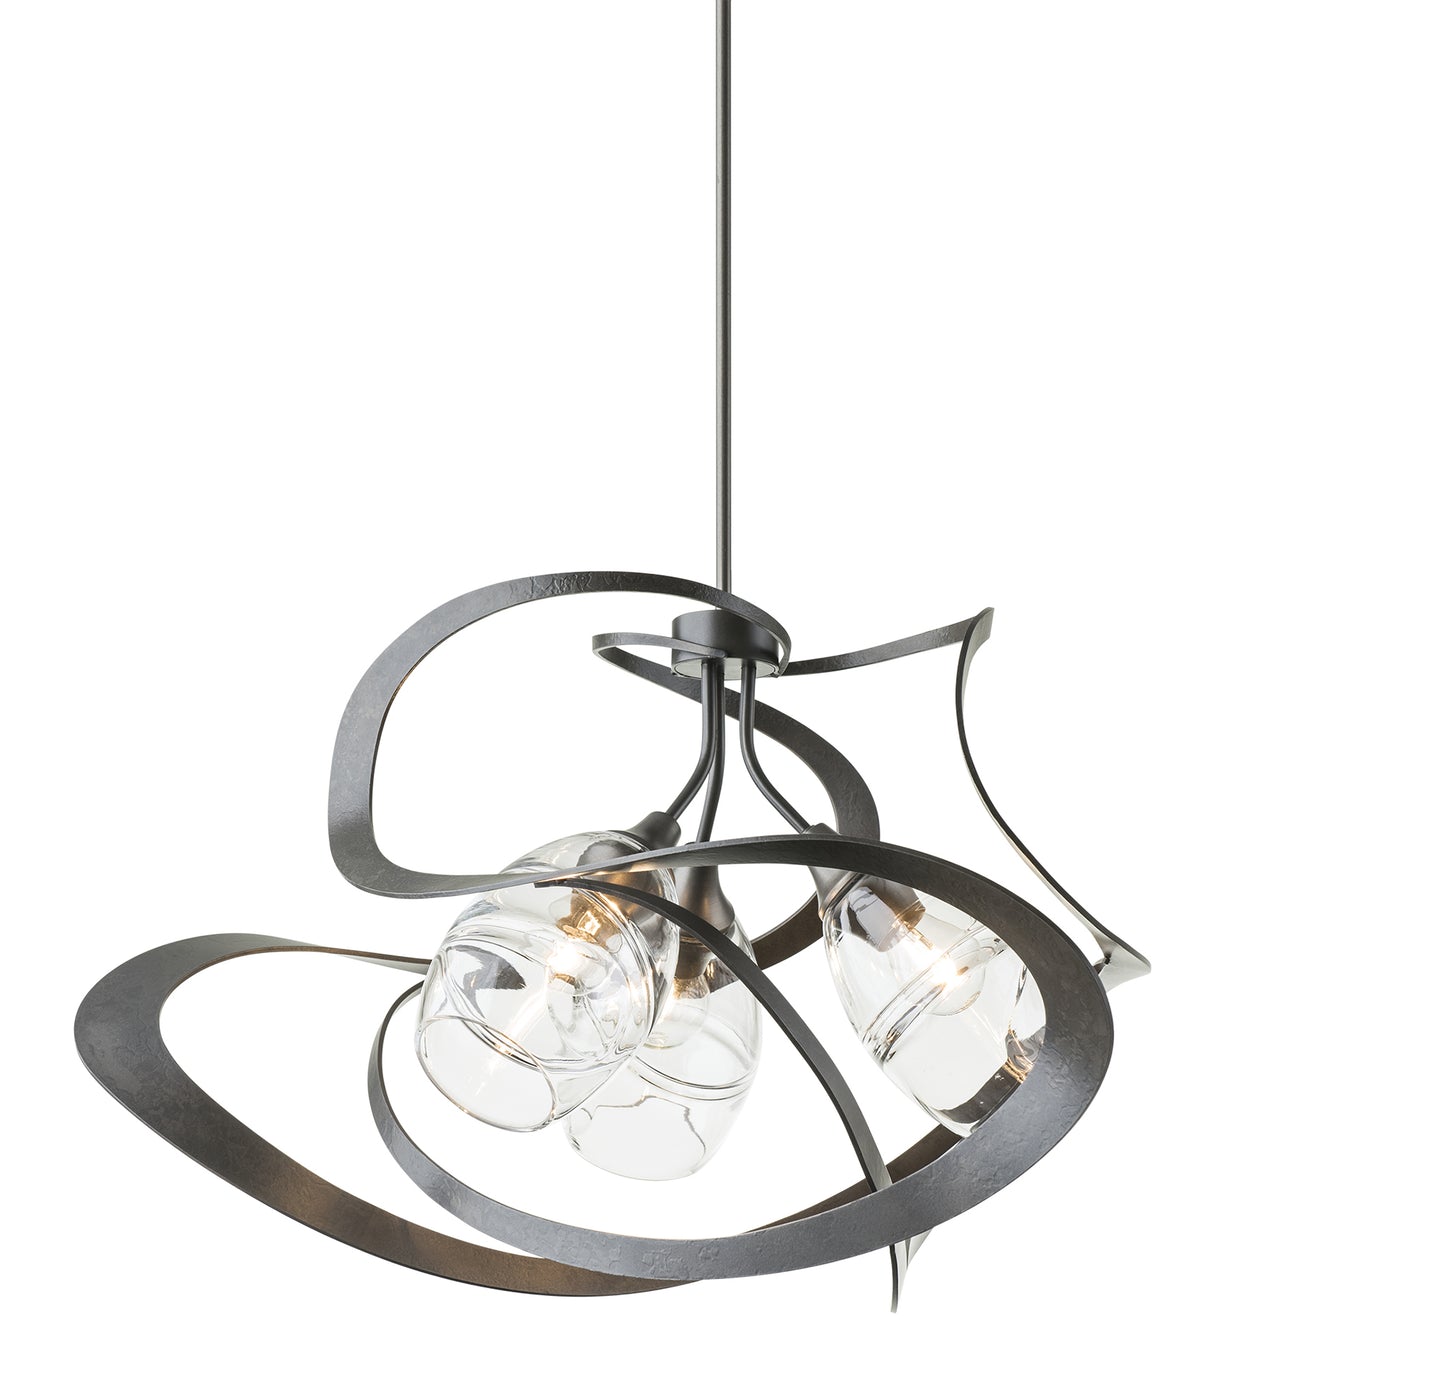 A handcrafted Nest Pendant with a black metal frame and glass shades by Hubbardton Forge lighting.